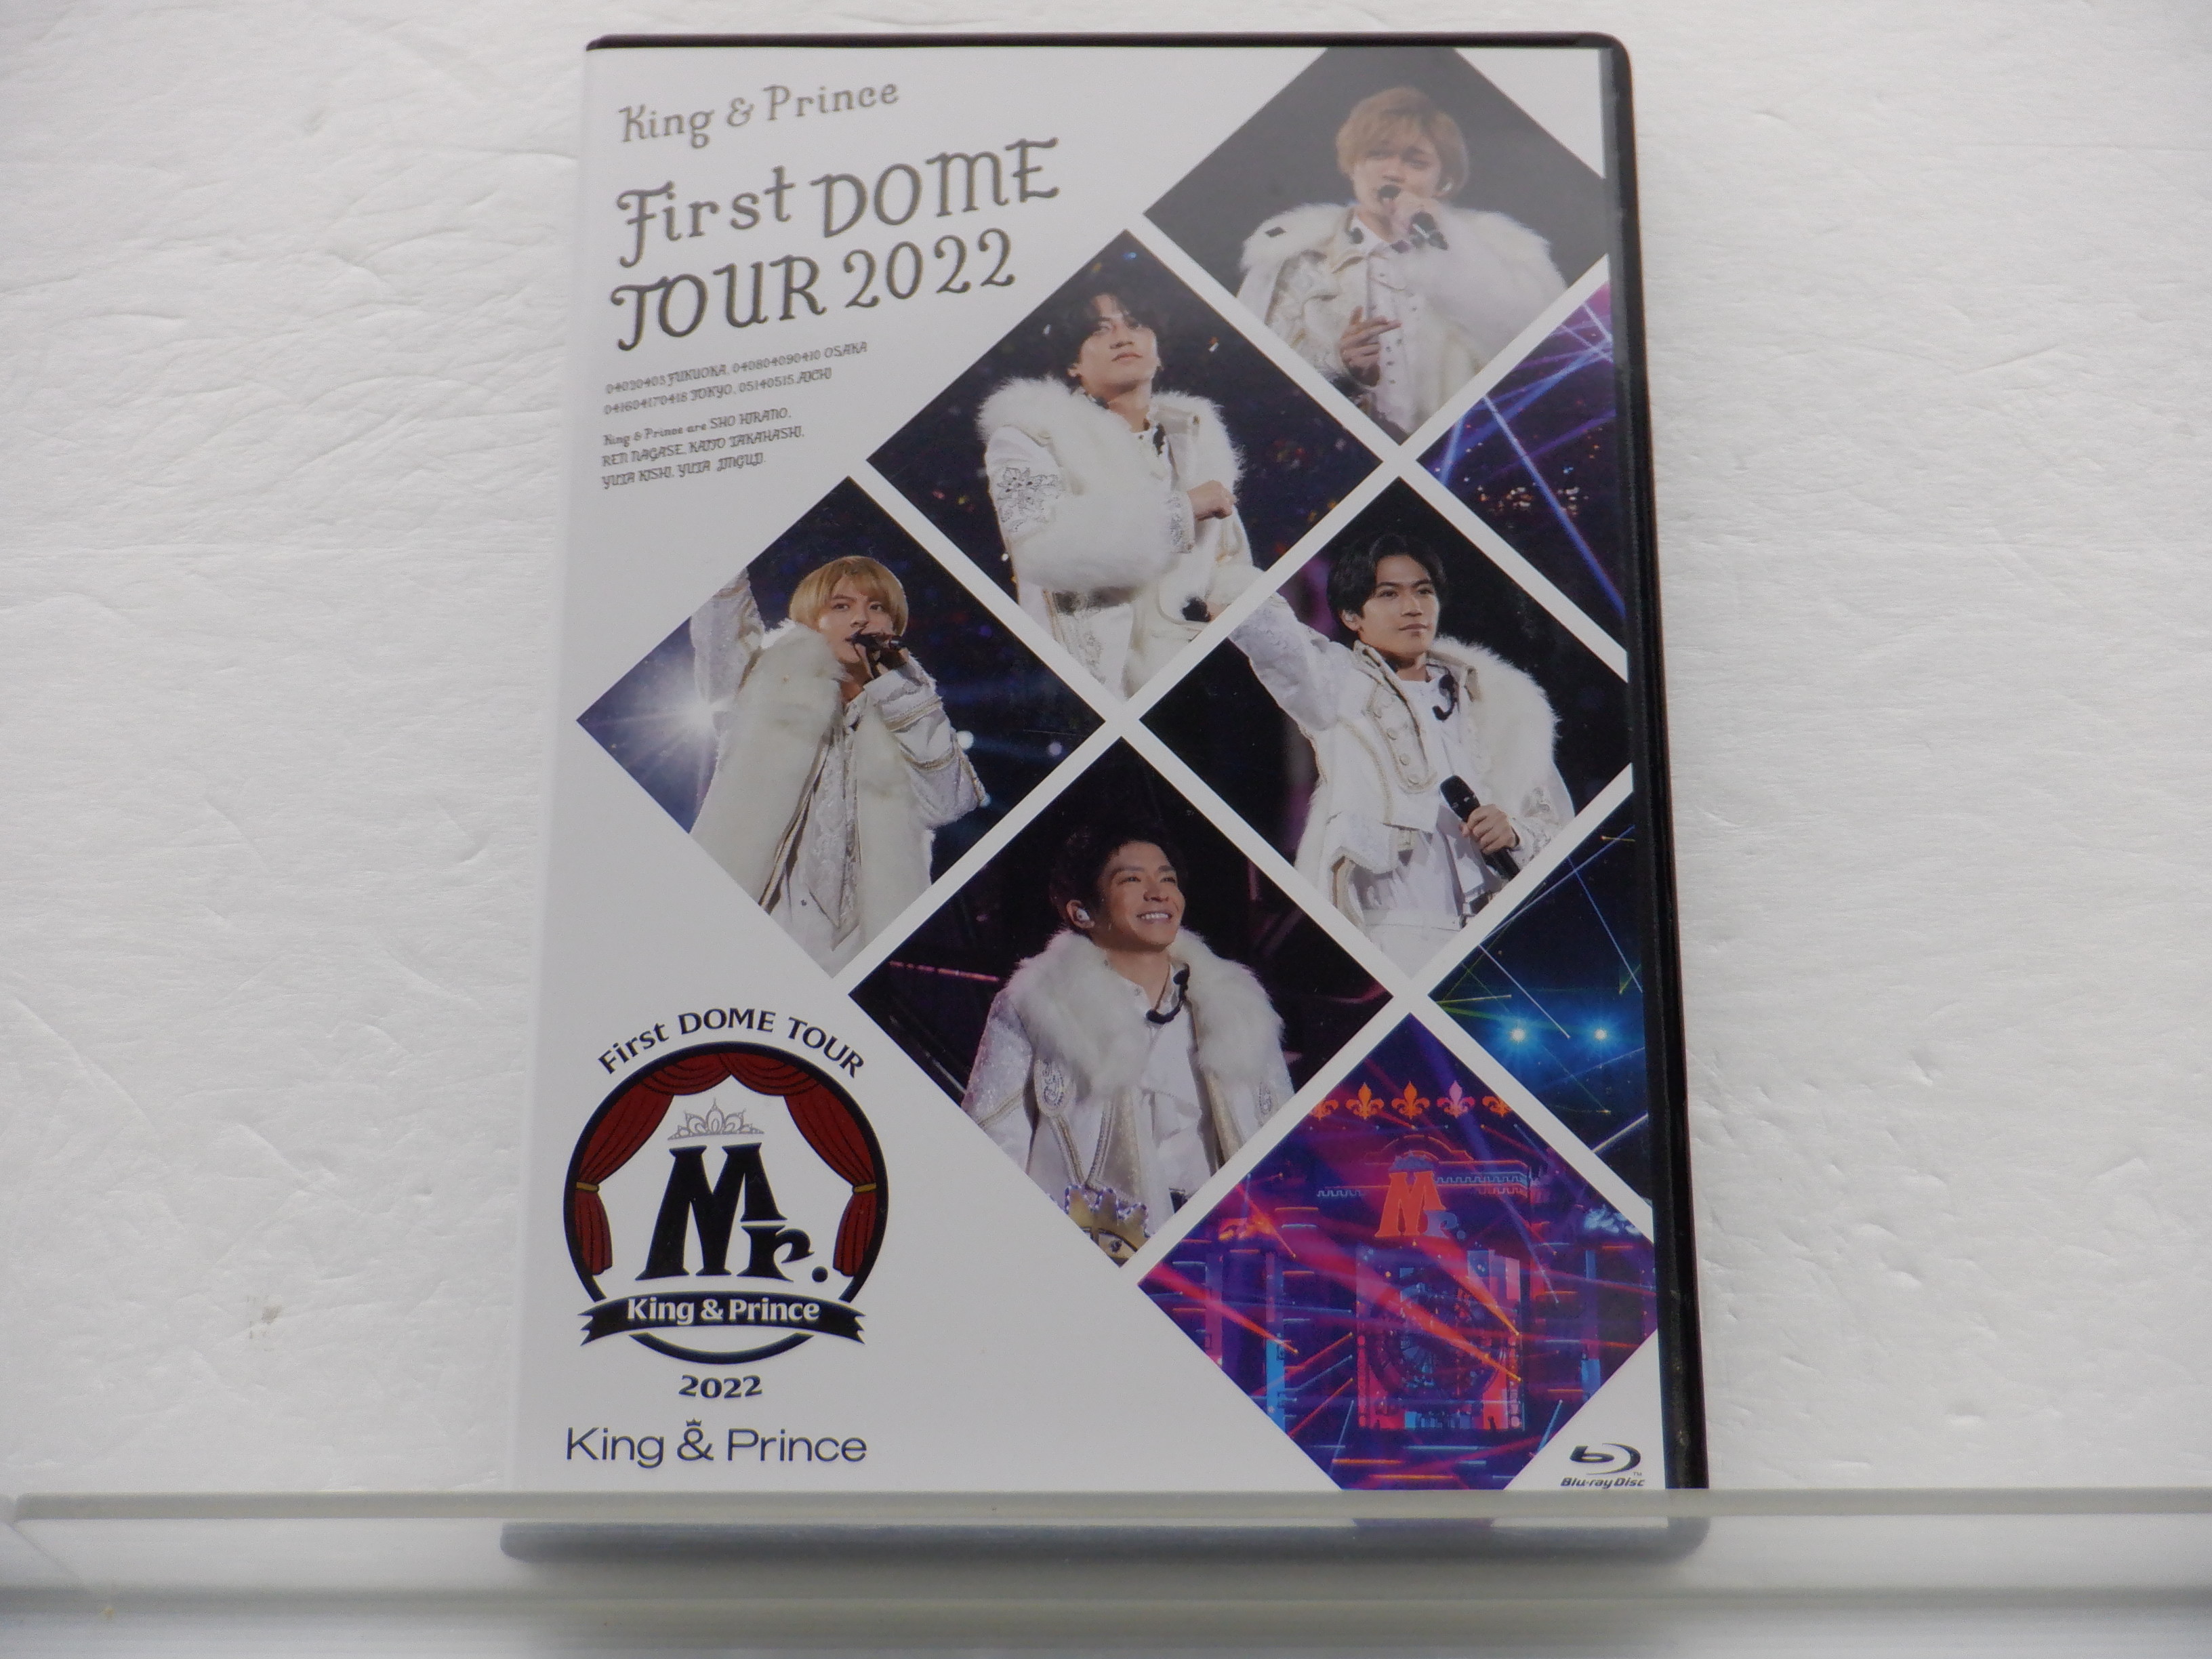 King&Prince Blu-ray First DOME TOUR 2022 ~Mr.~ general record 2BD